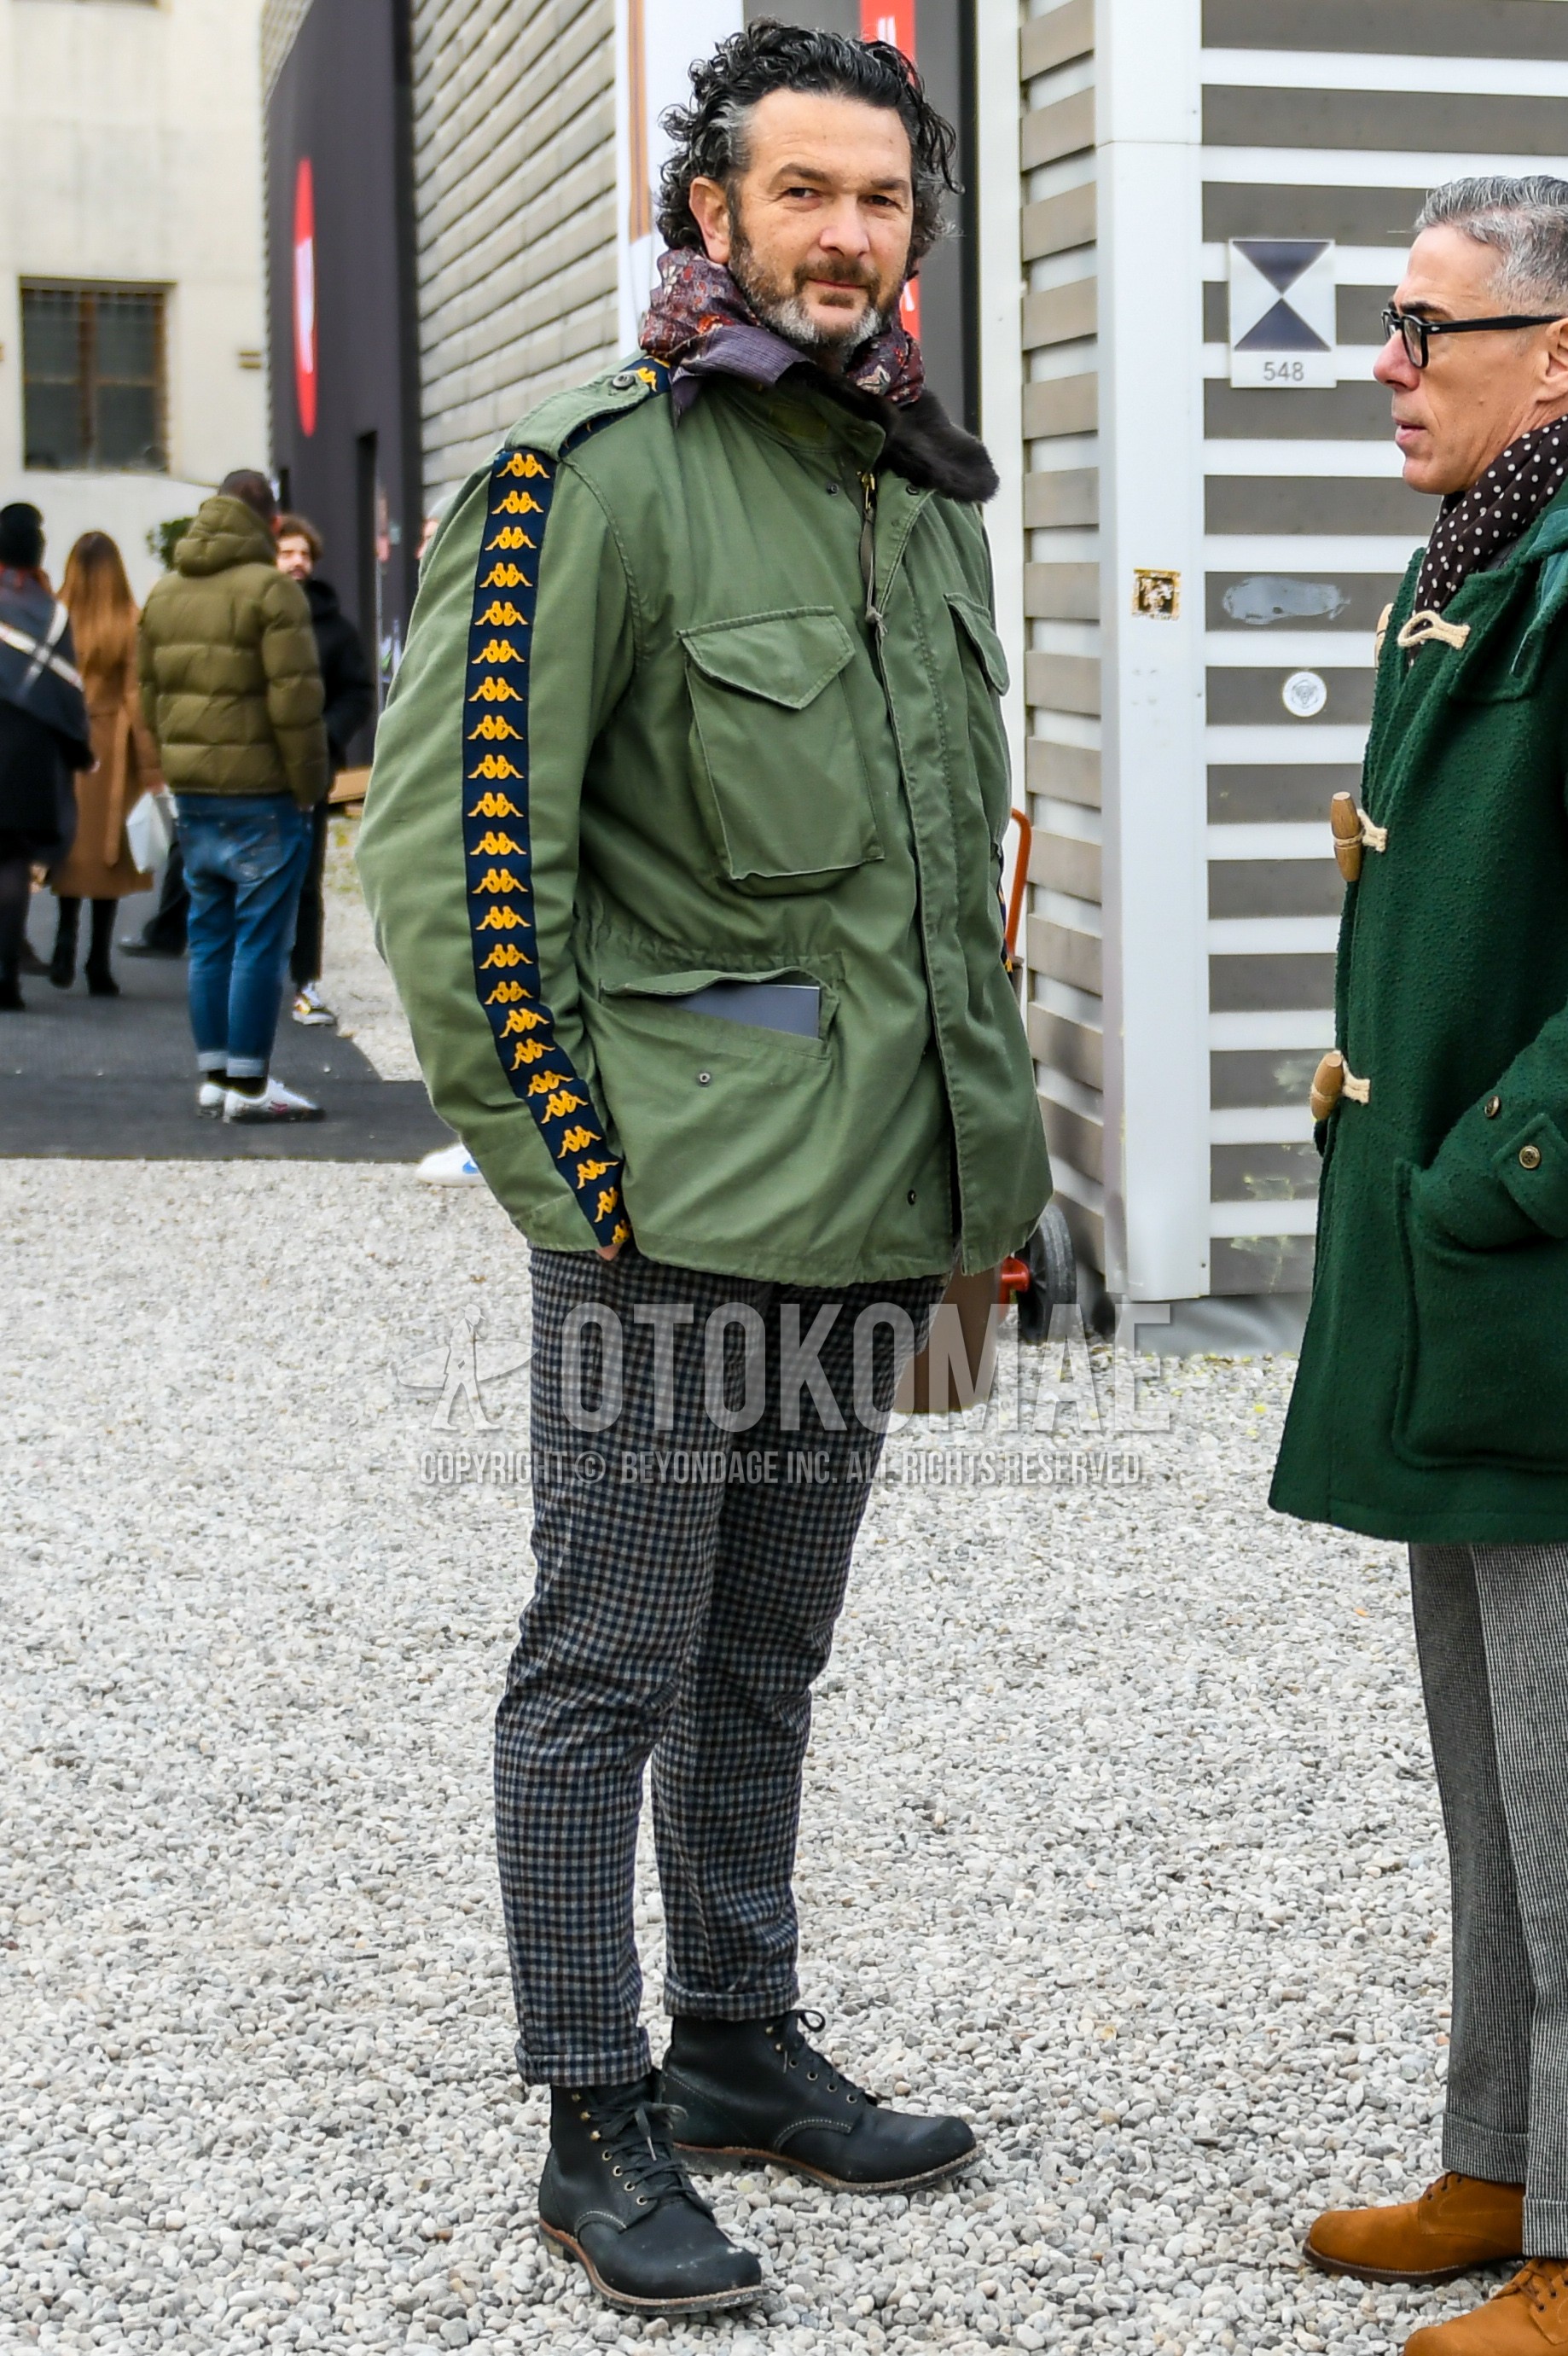 Men's autumn winter outfit with multi-color scarf scarf, olive green plain M-65, gray check cotton pants, black  boots.